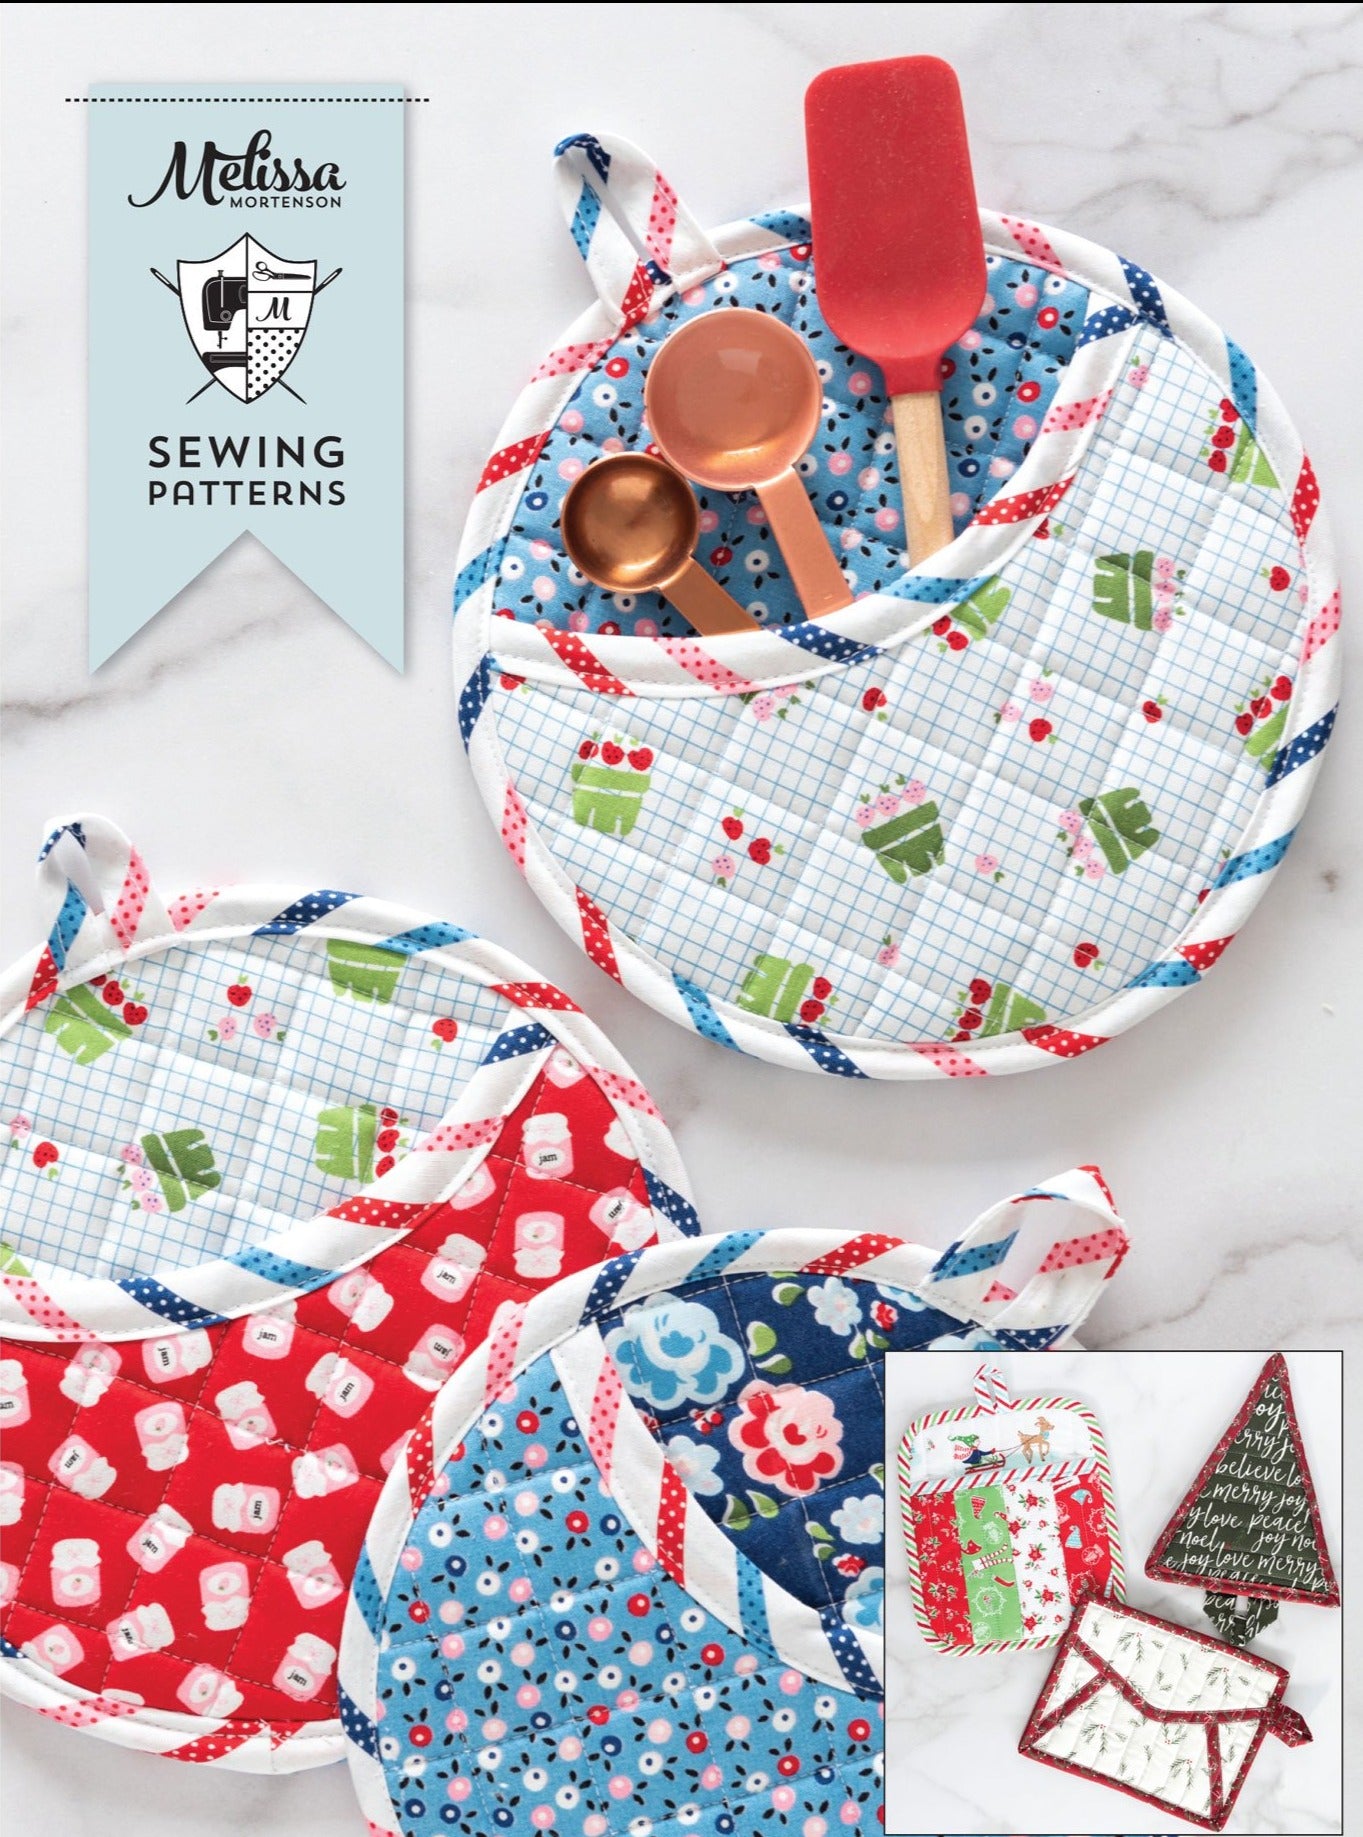 Cute Potholders  Sewing crafts, Sewing items, Sewing gifts